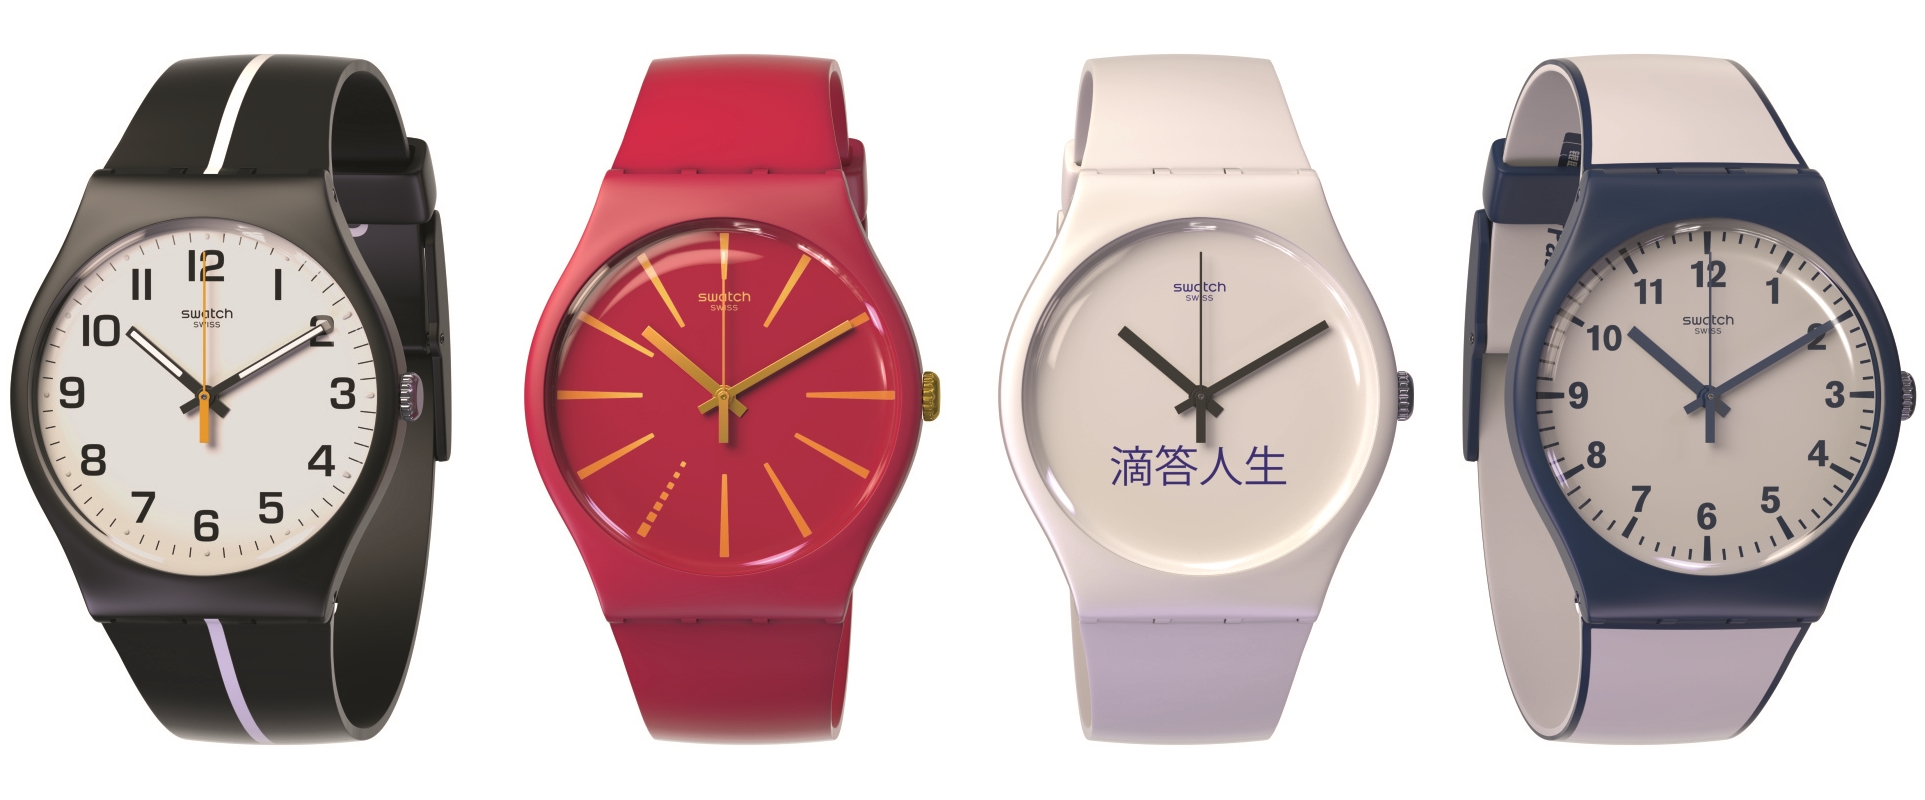 Swatch Launches Contactless Payment Watch